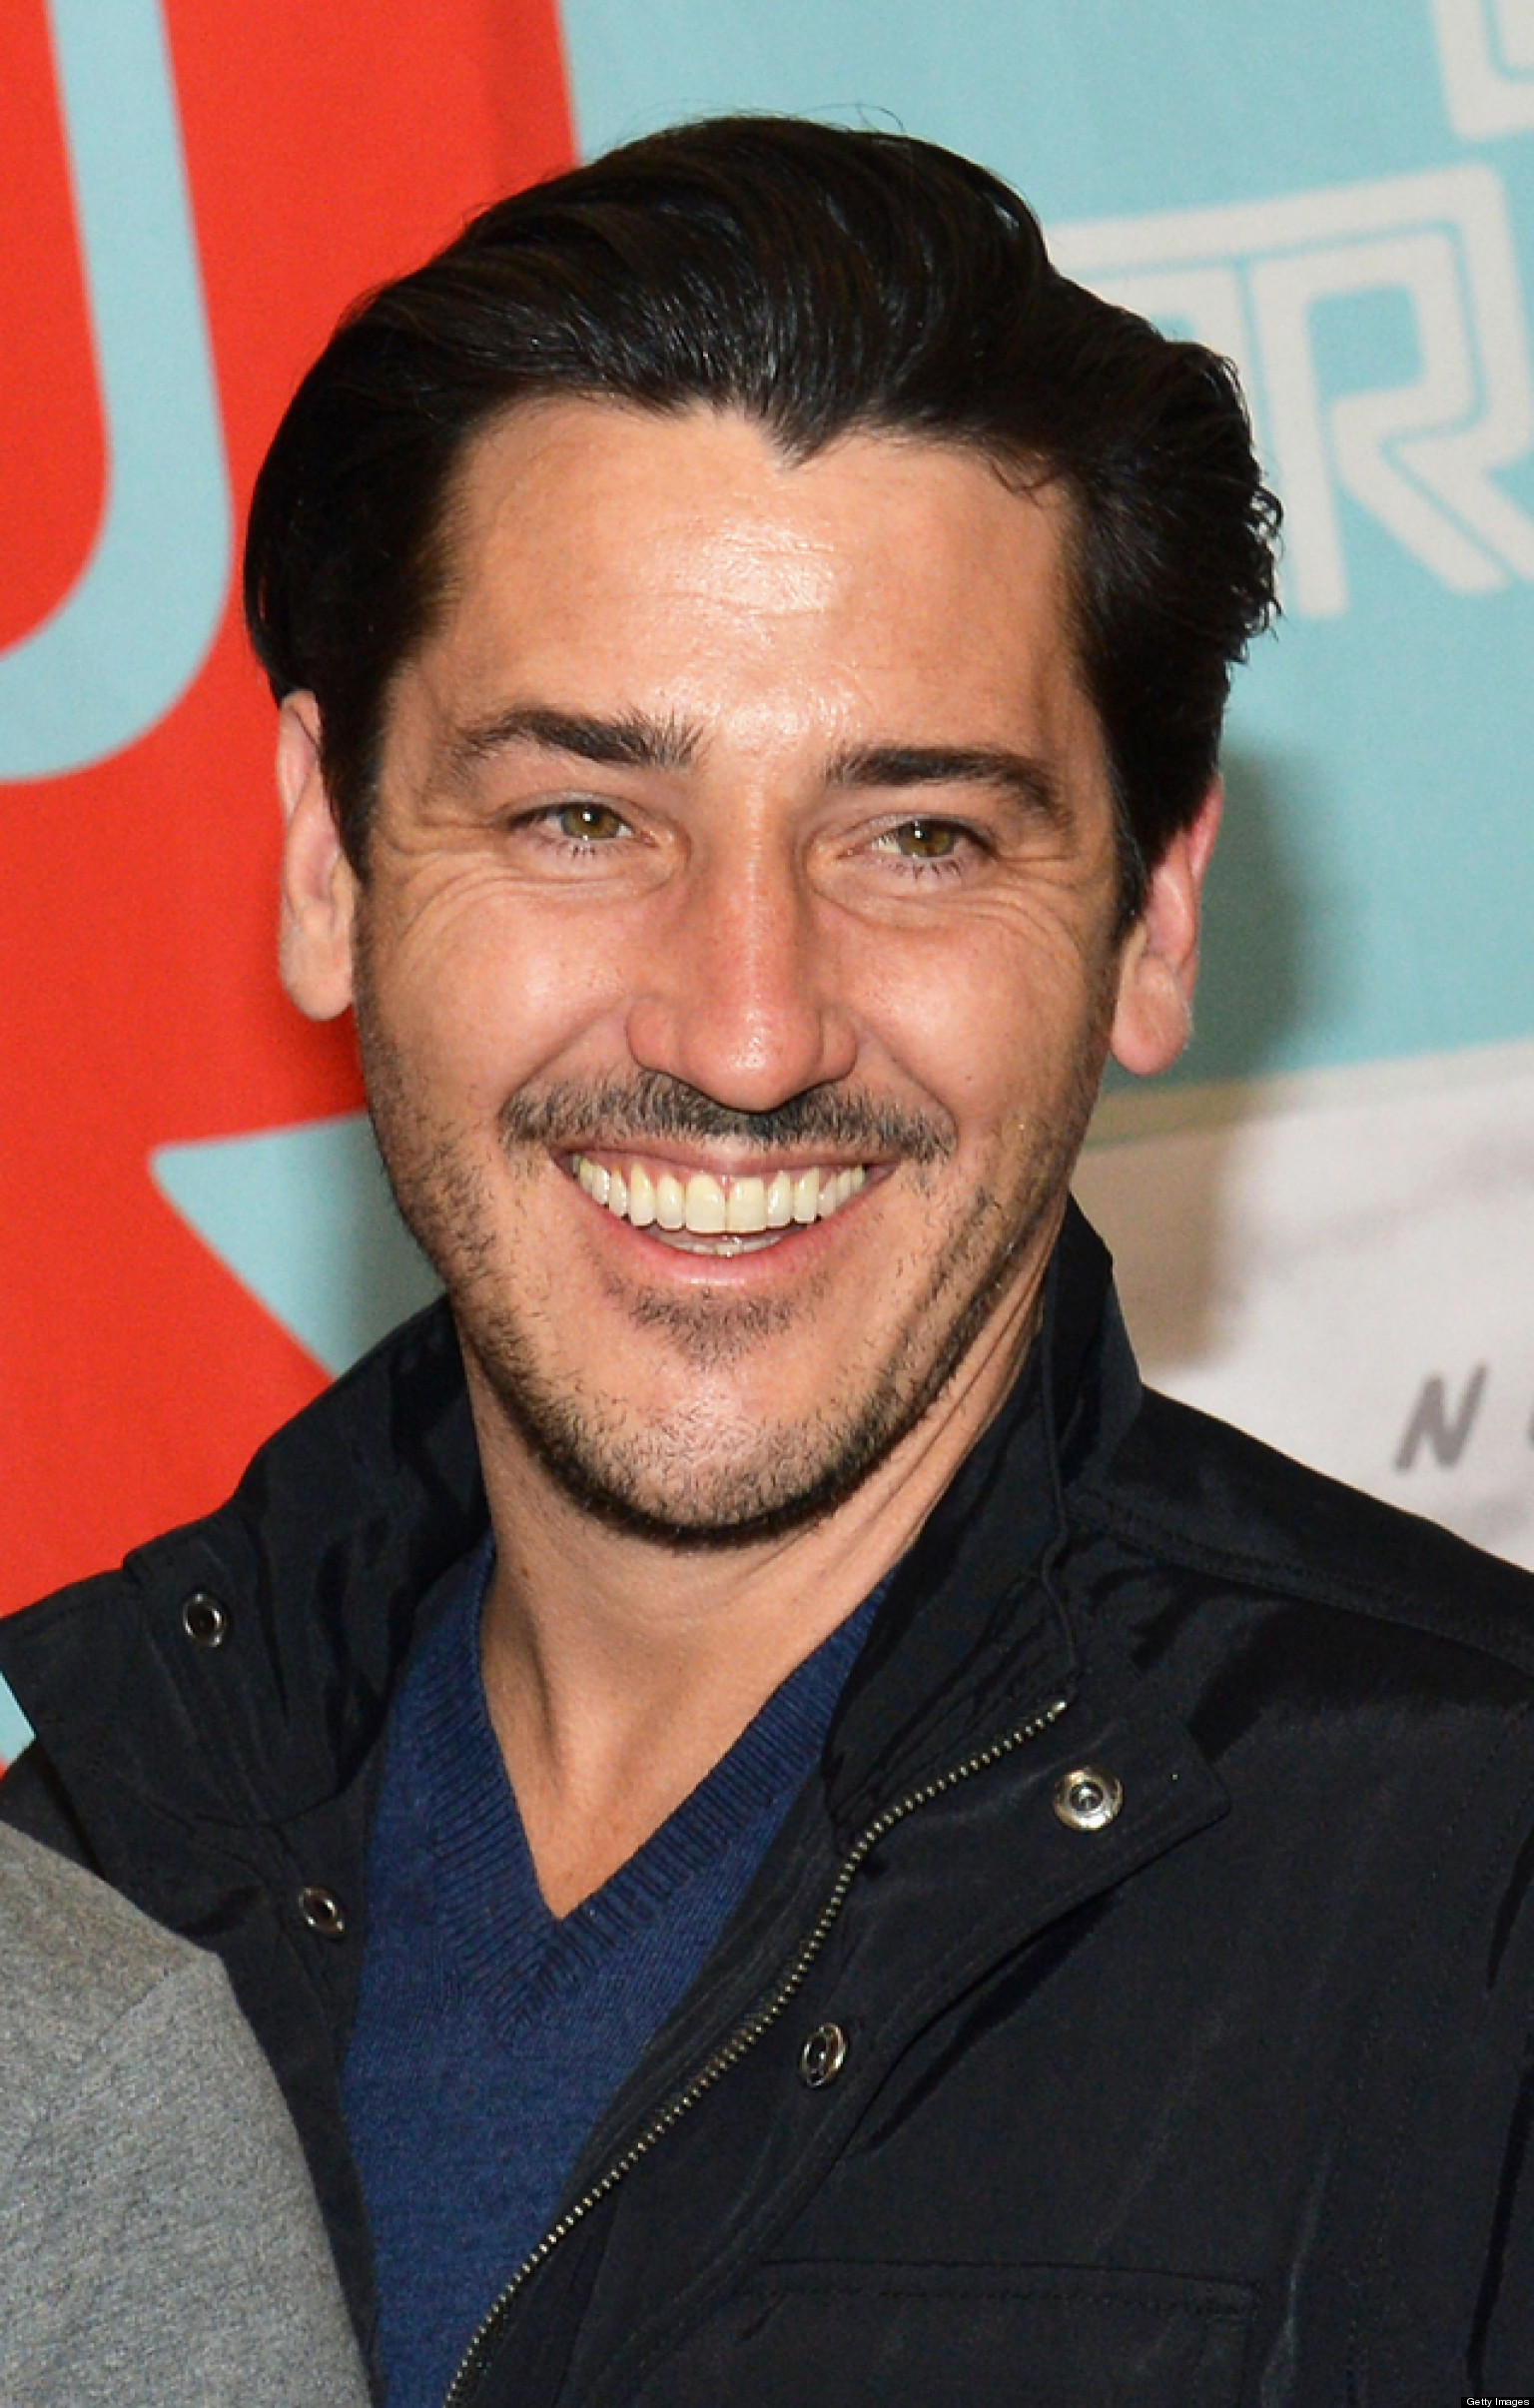 Jonathan Knight Of NKOTB On Being Outed As Gay By Tiffany, Perez Hilton